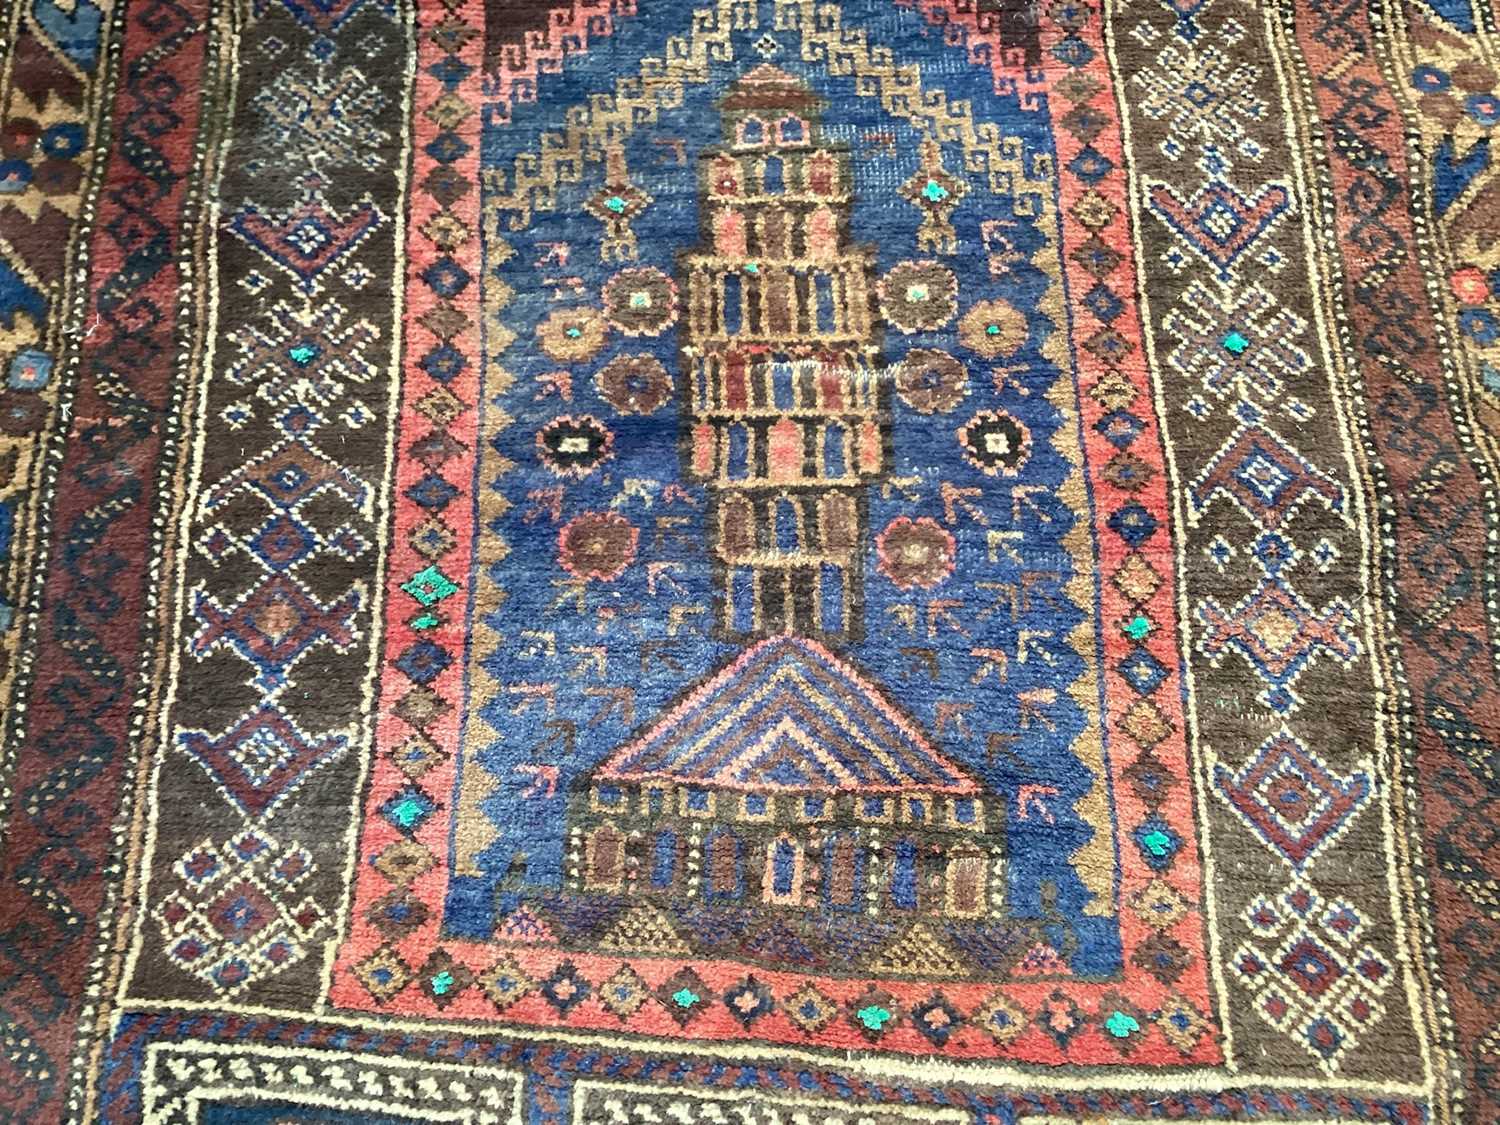 Eastern rug decorated with buildings on red, blue and brown ground, 128cm x 80cm - Image 2 of 4